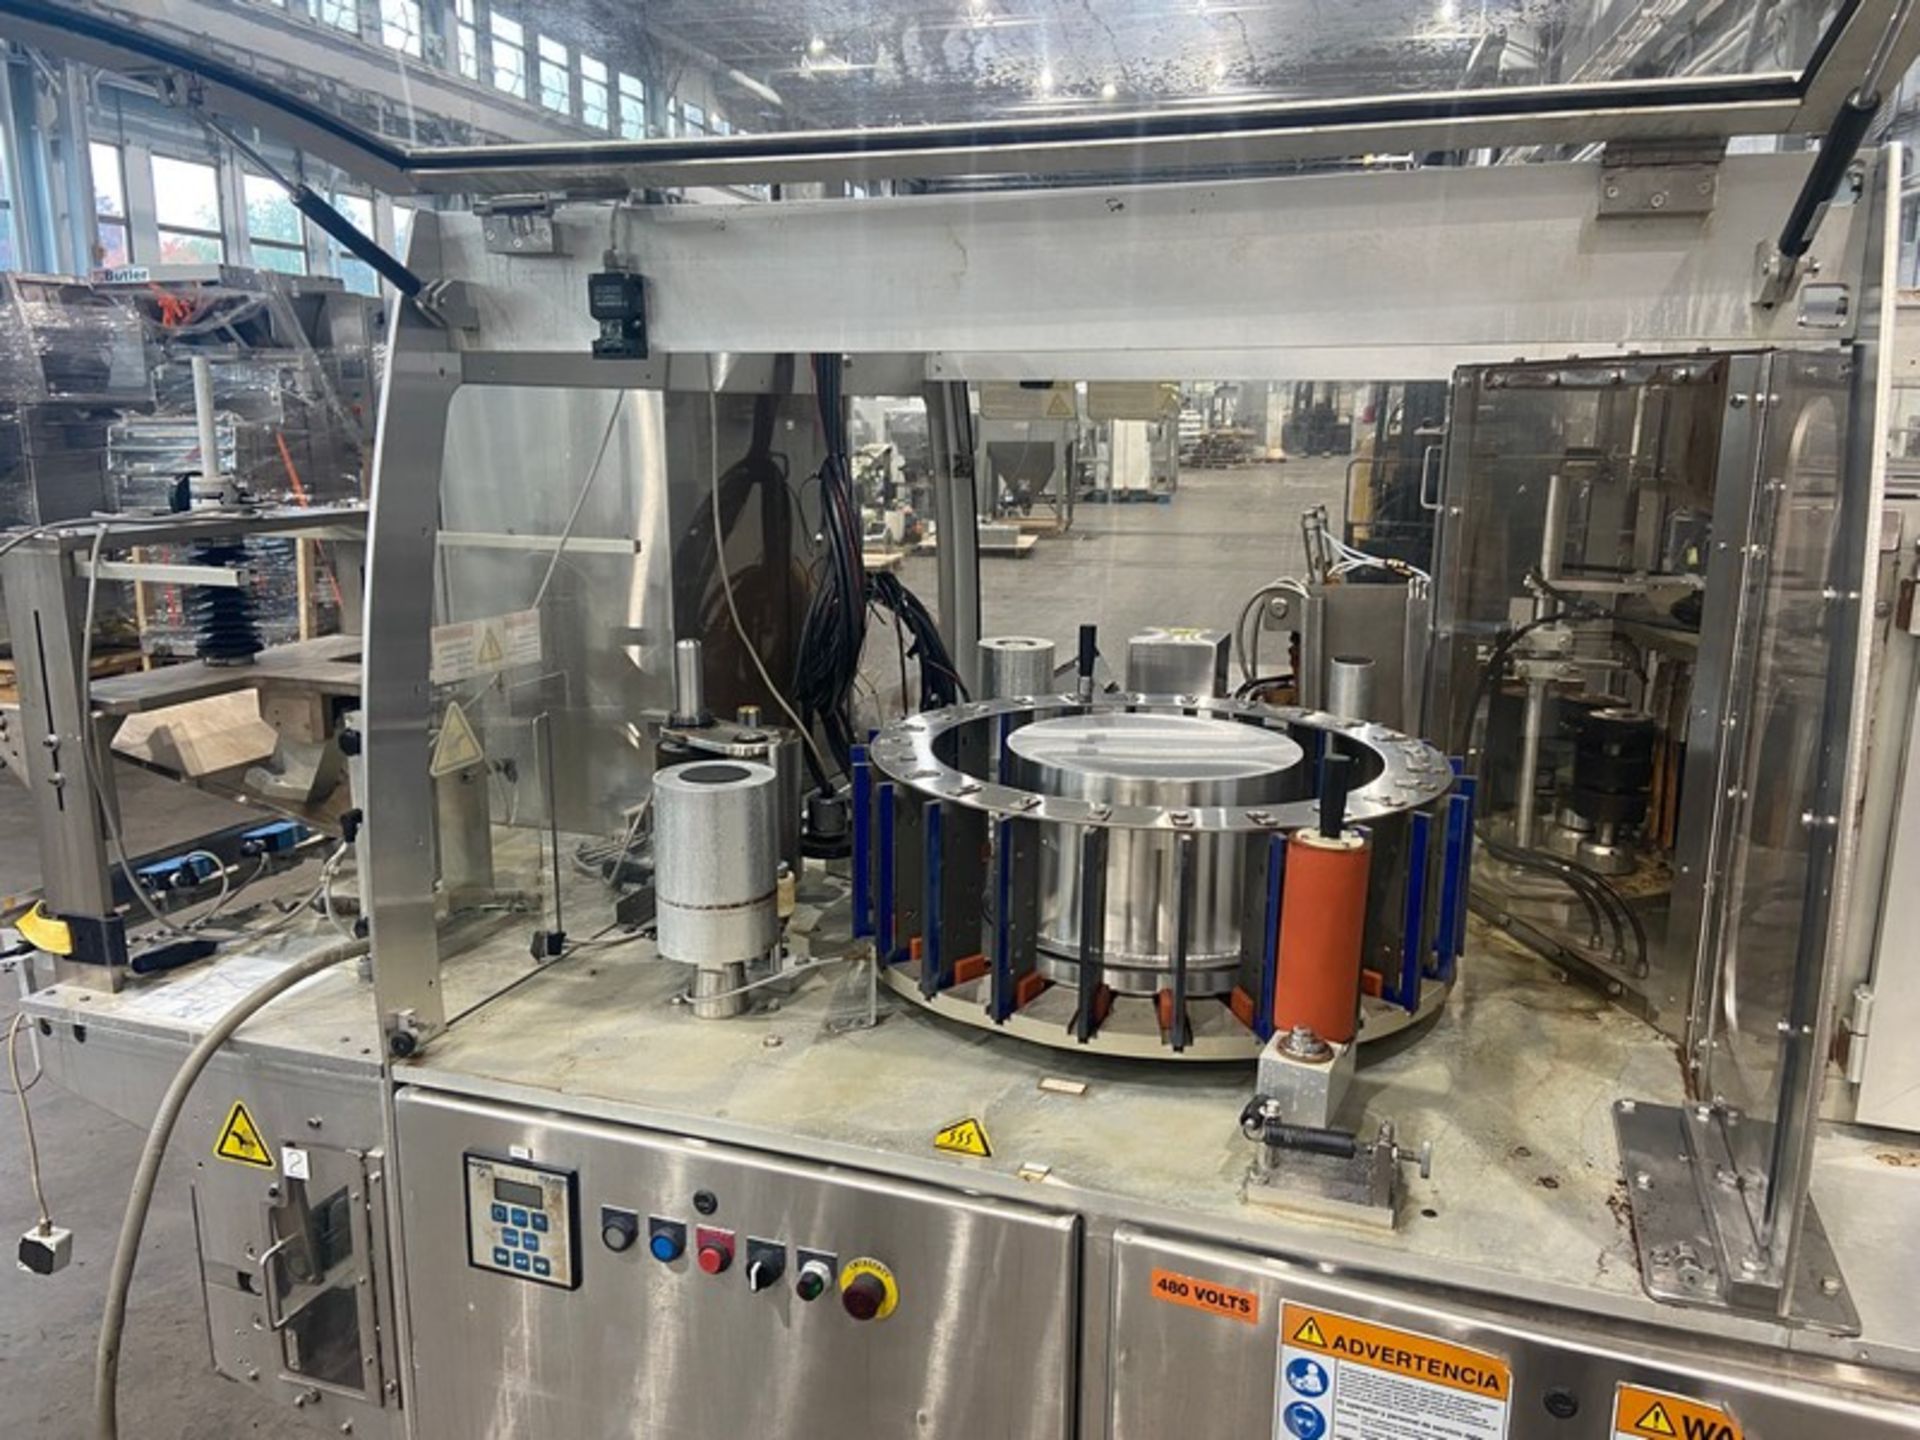 R.A. Jones Pouch King Pouch Filler,M/N S-6042, S/N S-6042, 460 Volts, 3 Phase, with On Board Control - Image 7 of 19